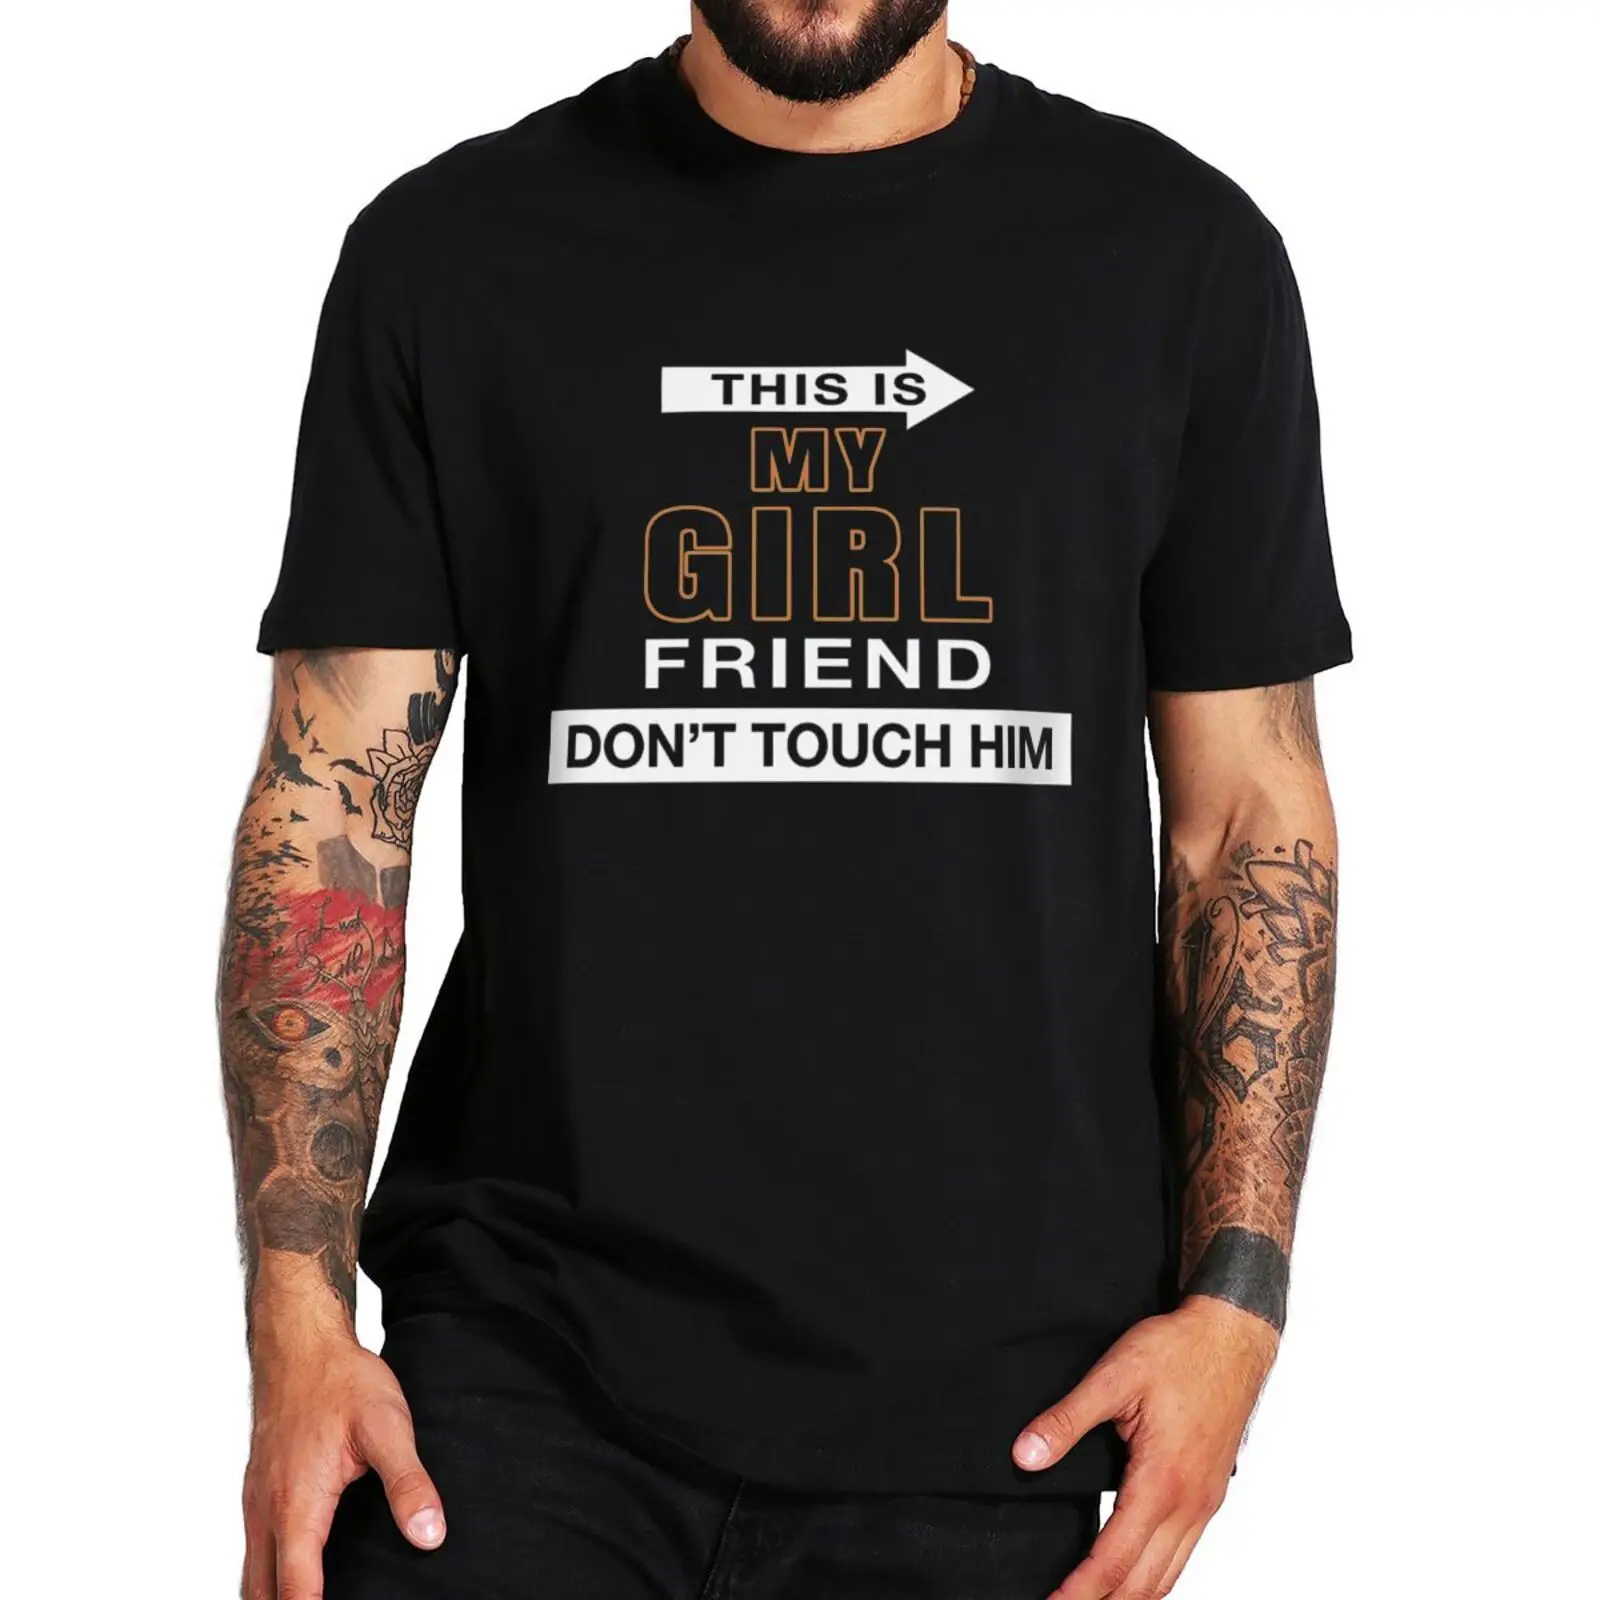 This Is My Girlfriend Don't Touch Him T Shirt Funny Meme Adult Humor Tops Casual 100% Cotton O-neck EU Size Soft T-shirts